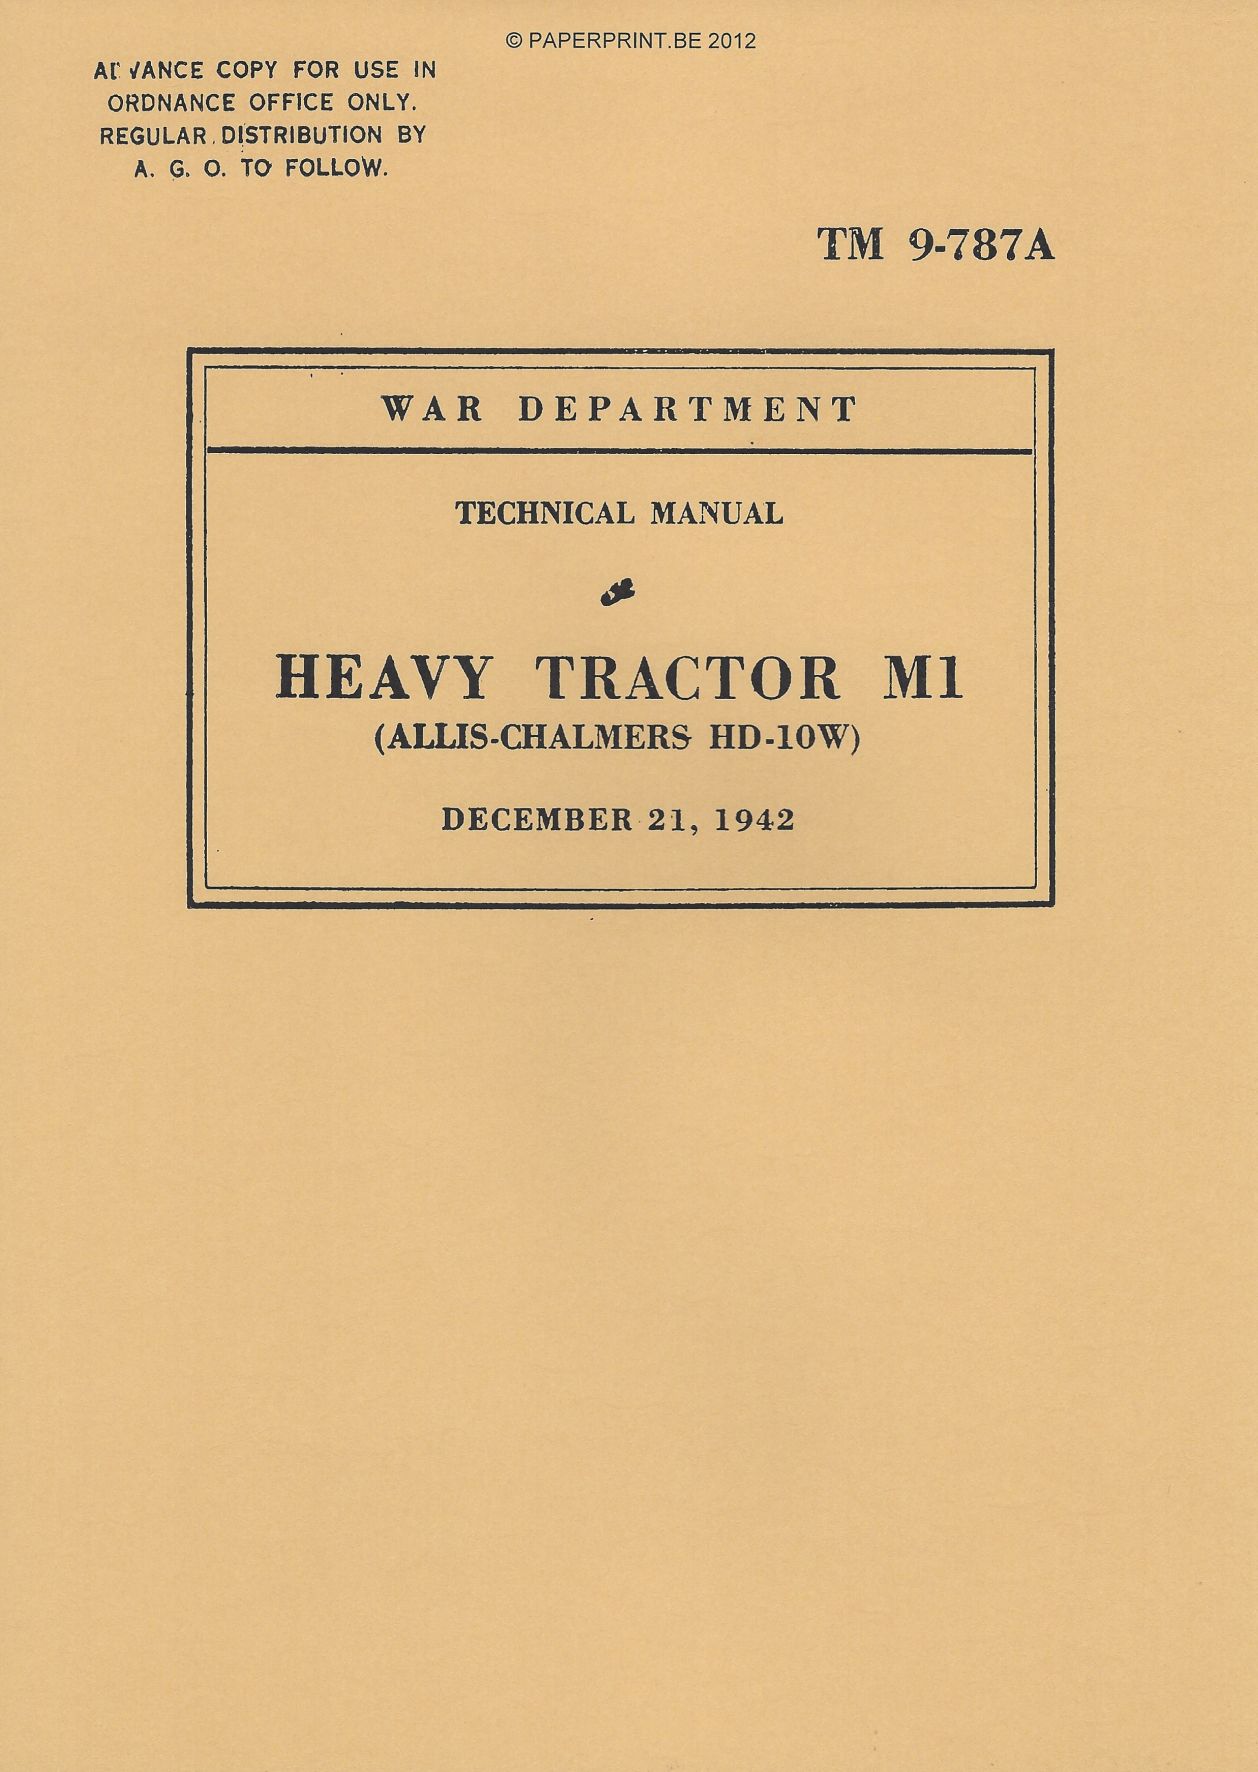 TM 9-787A US HEAVY TRACTOR M1